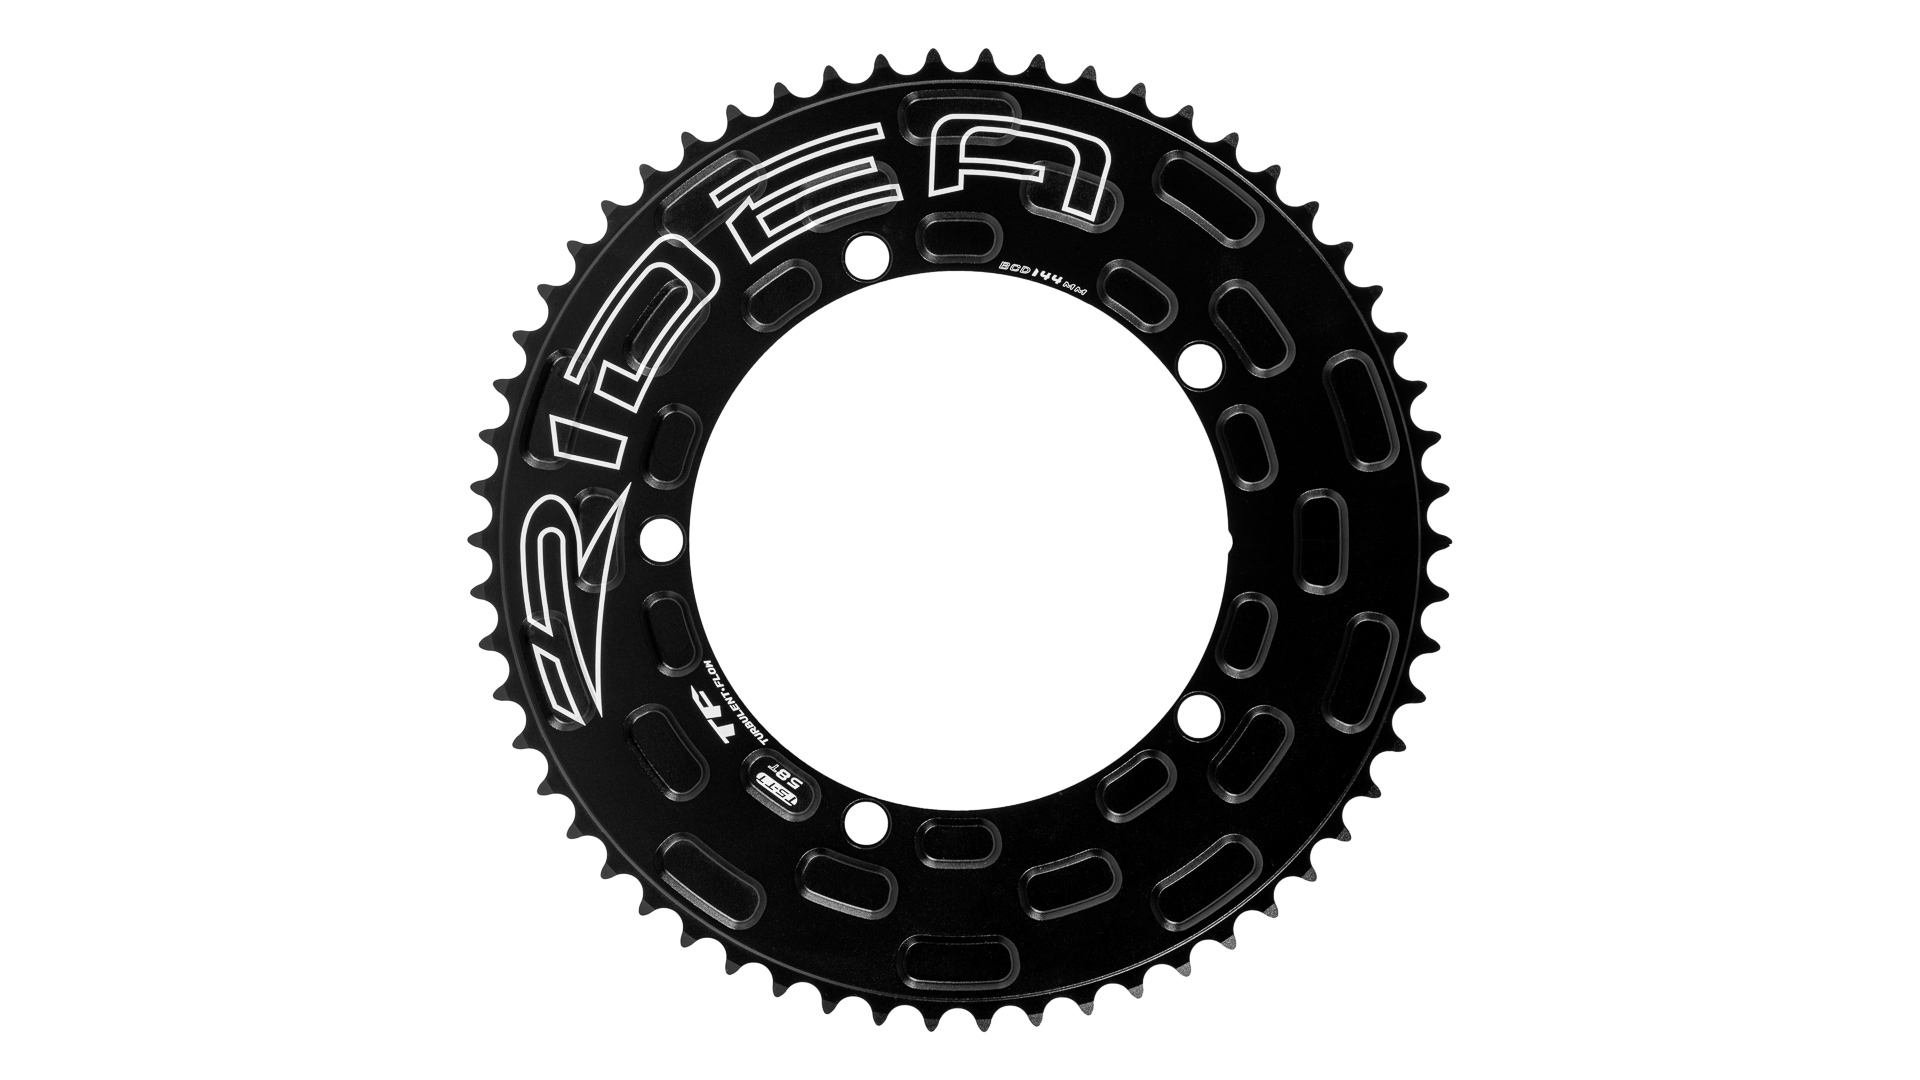 Turbulent Flow chainrings